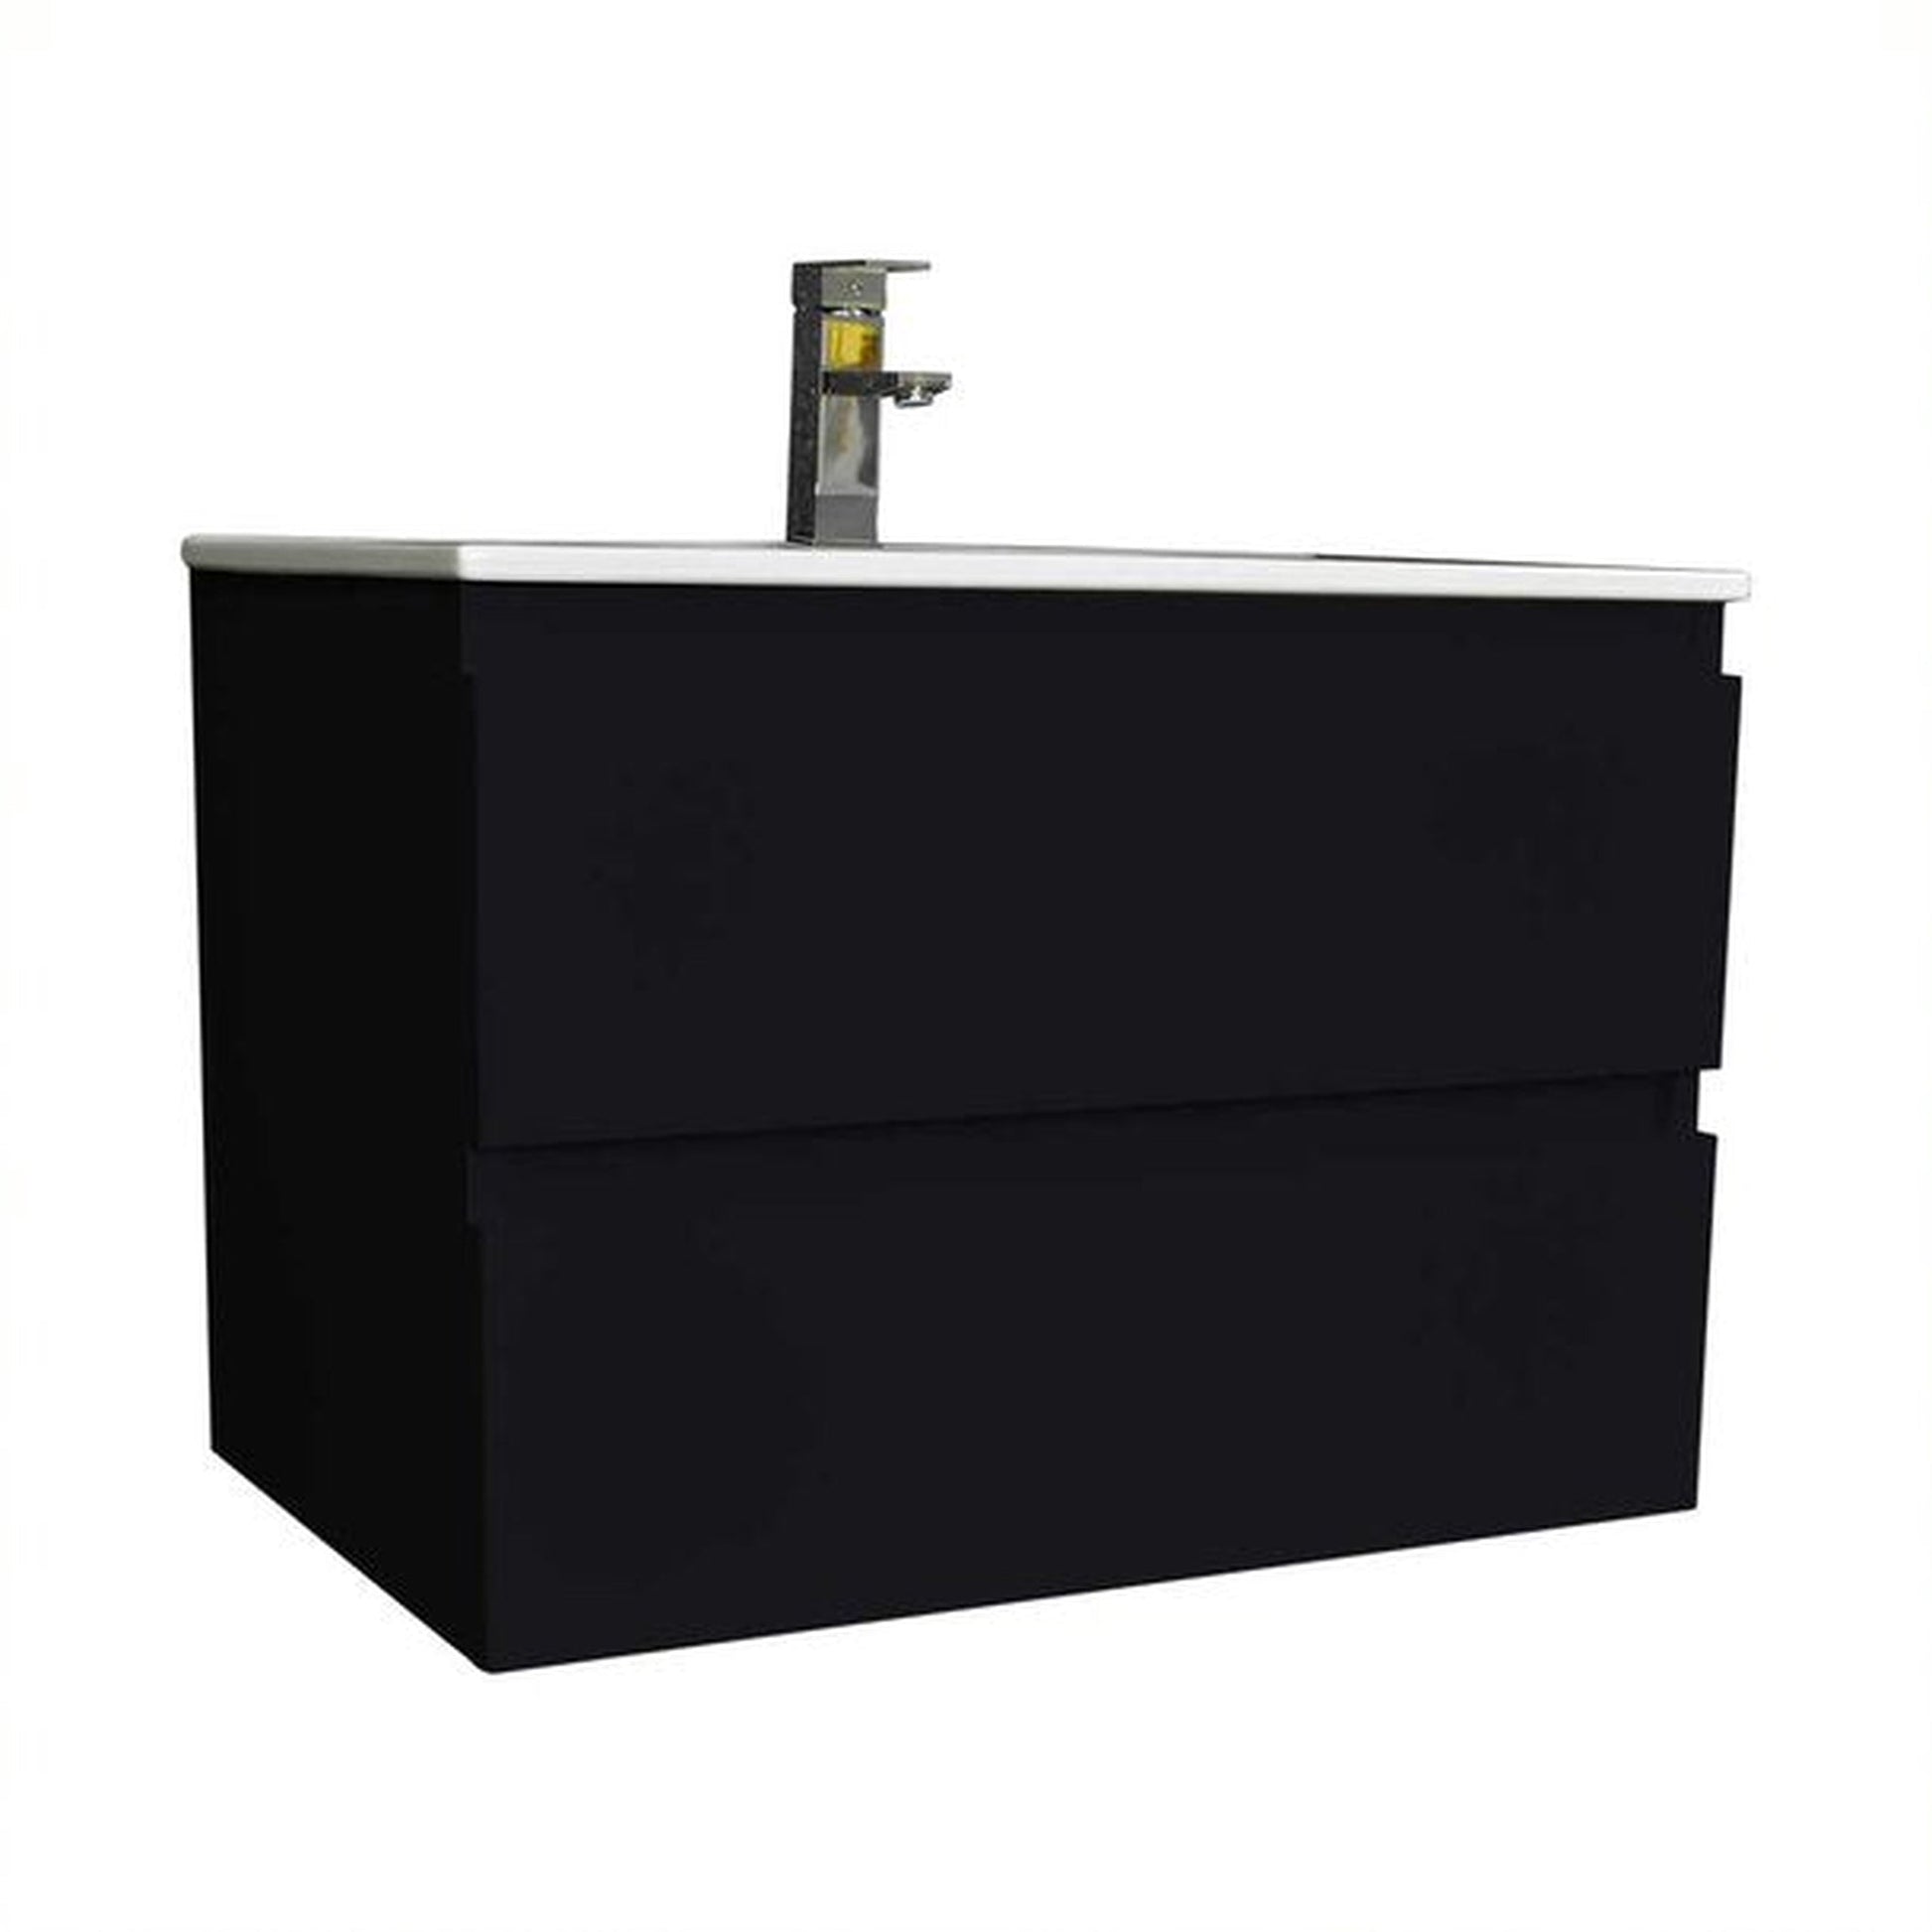 Volpa USA Salt 30" x 18" Black Wall-Mounted Floating Bathroom Vanity With Drawers, Integrated Porcelain Ceramic Top and Integrated Ceramic Sink